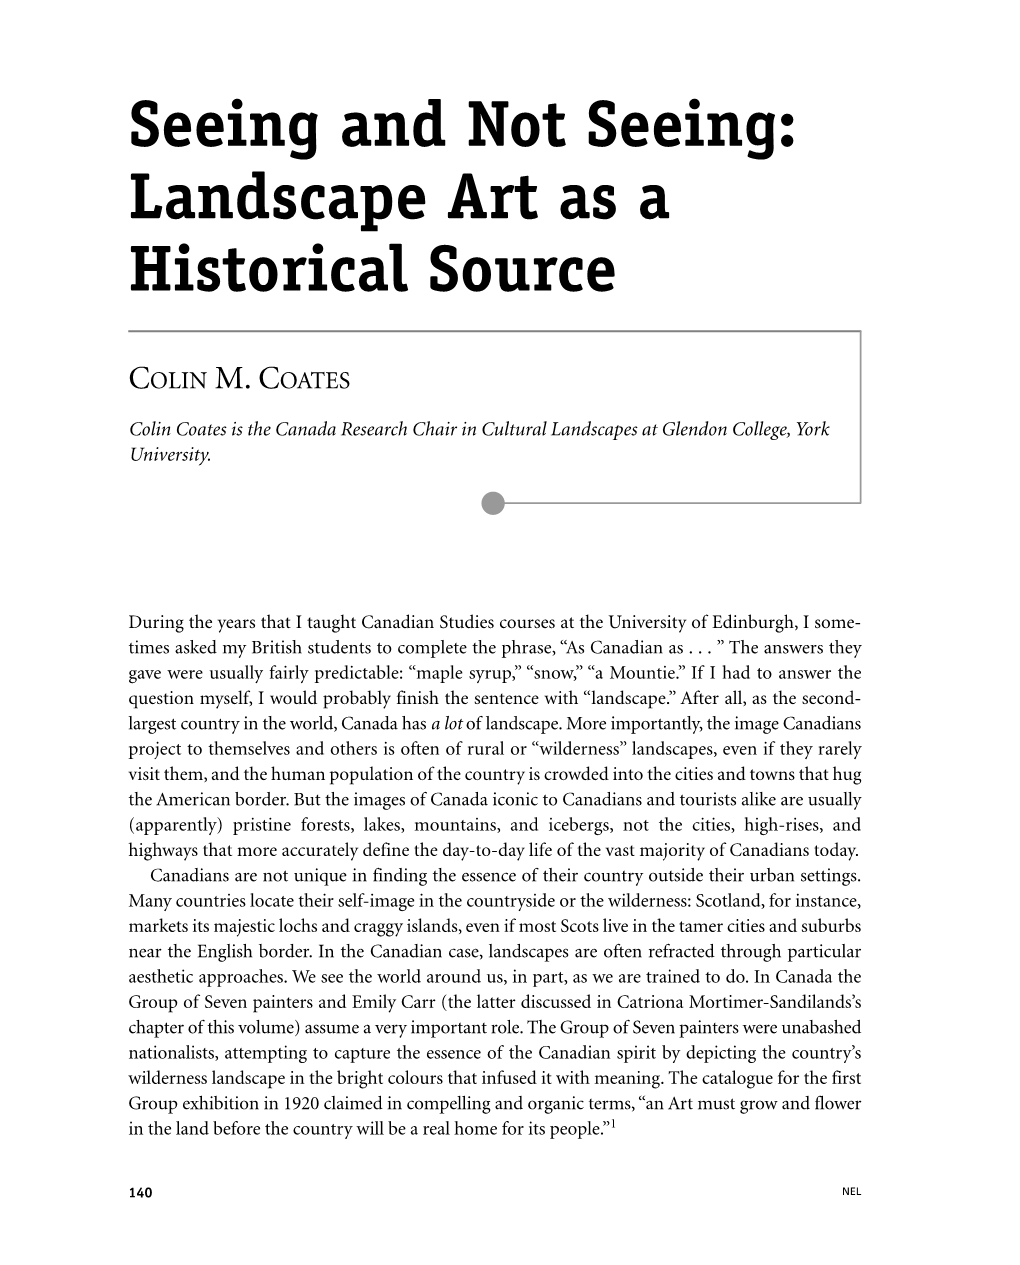 Seeing and Not Seeing: Landscape Art As a Historical Source